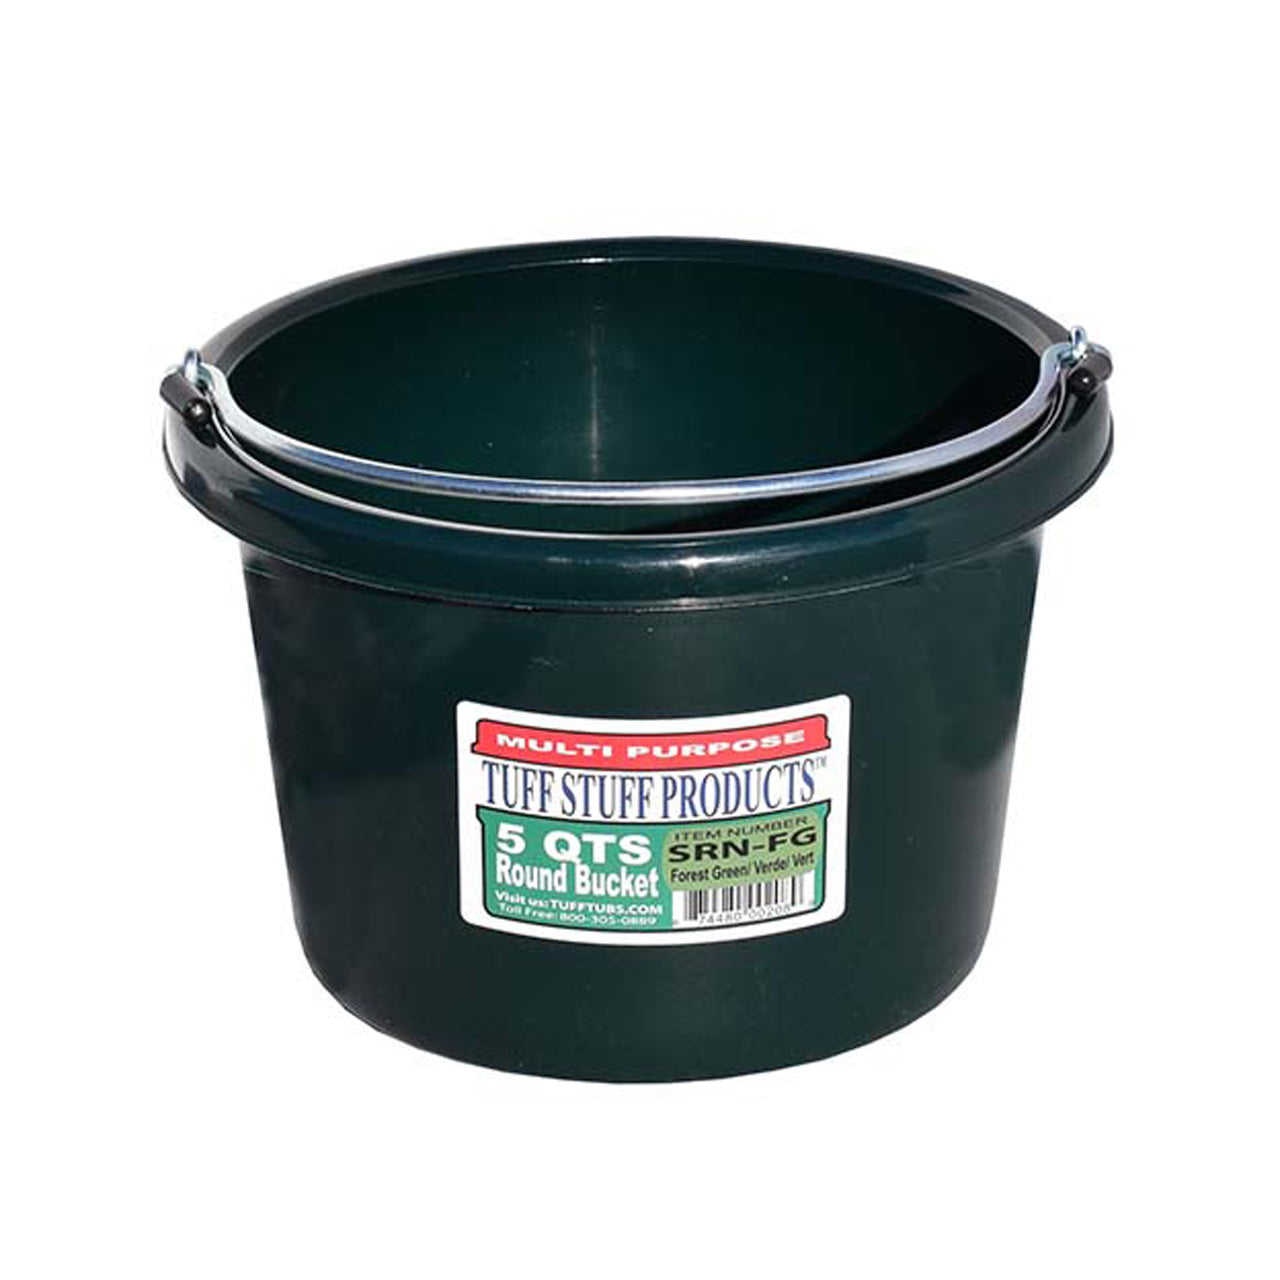 Tuff Stuff Small Round Bucket 5 Qts (Forest Green) - Buckets Pails Feeders Scoops Tubs Bottles Tuff Stuff - Canada